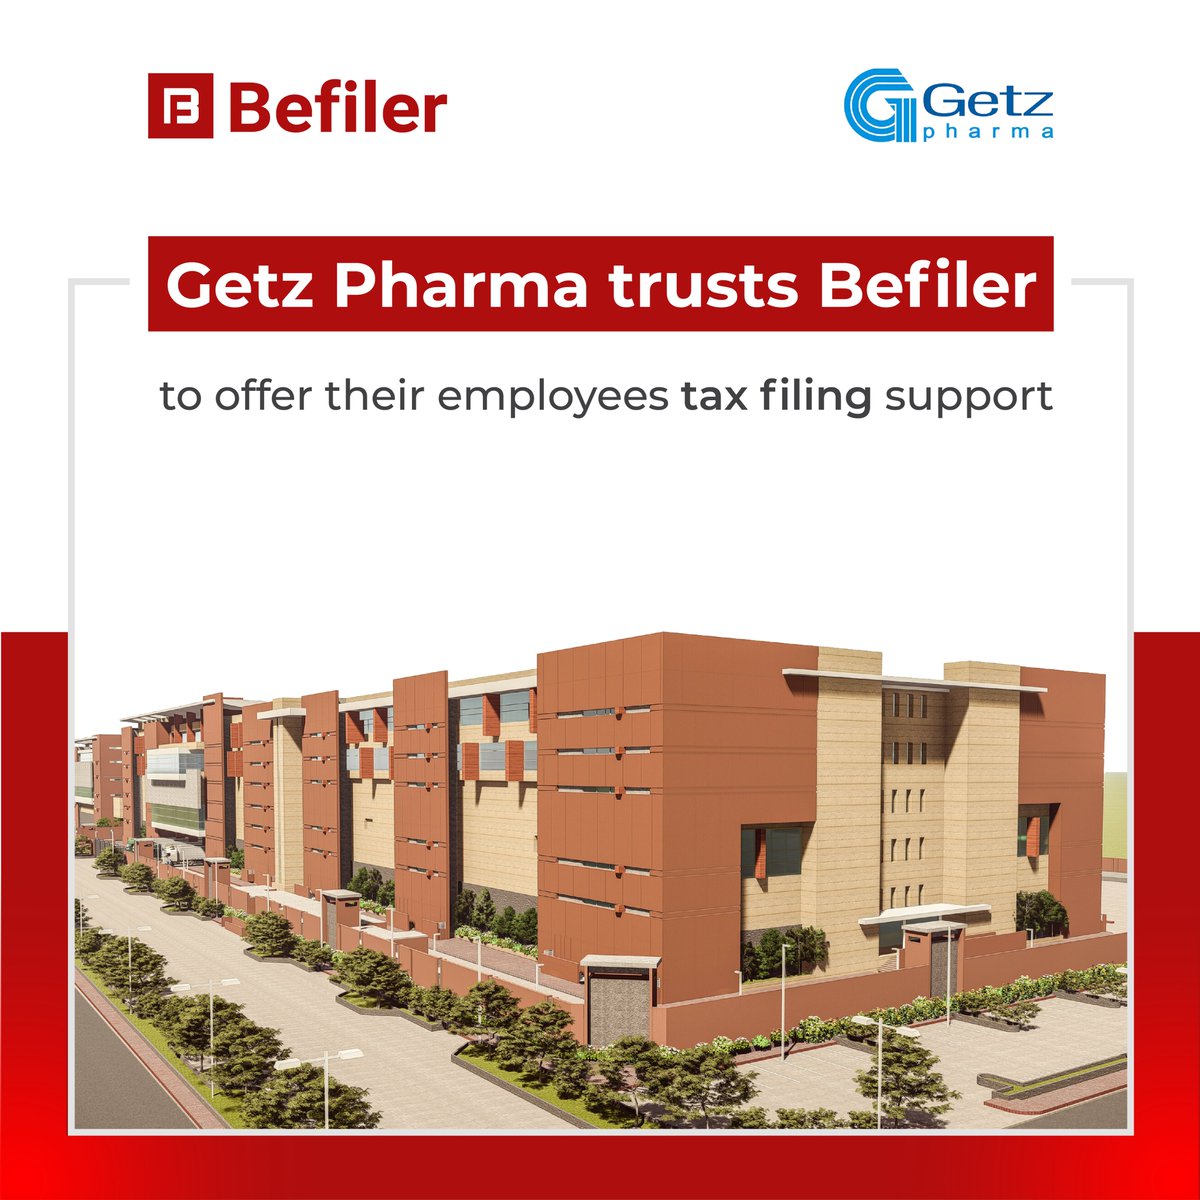 Along with Getz Pharma, 400k+ individuals, and SMEs trust Befiler for their tax compliance. Download Befiler and become one of them.
#Befiler #GetzPharma #Pakistan #Trust #Taxes